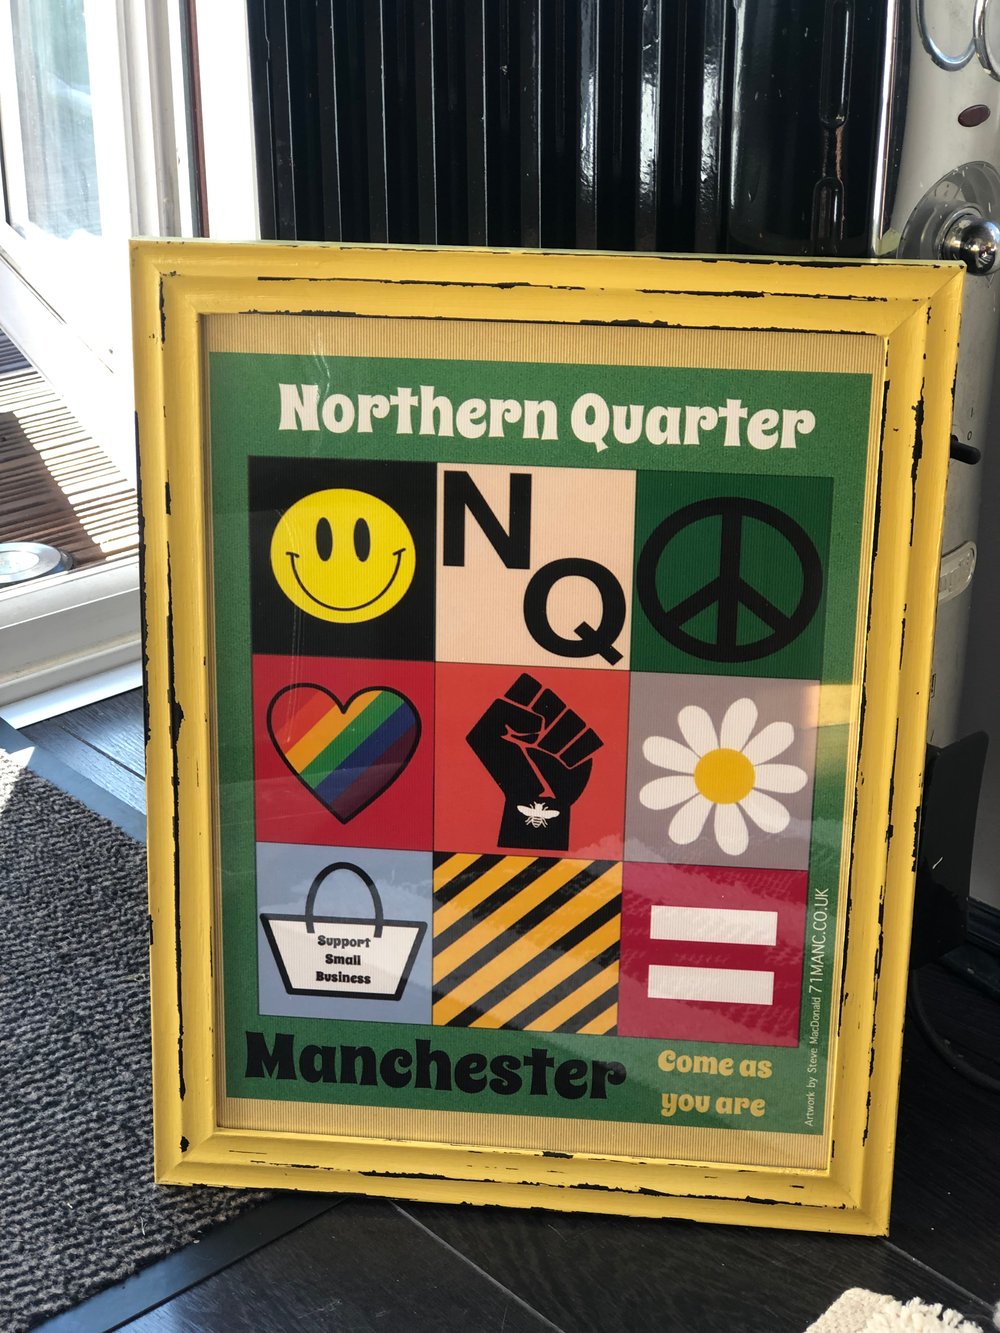 Northern Quarter Manchester - Come as you are print or framed